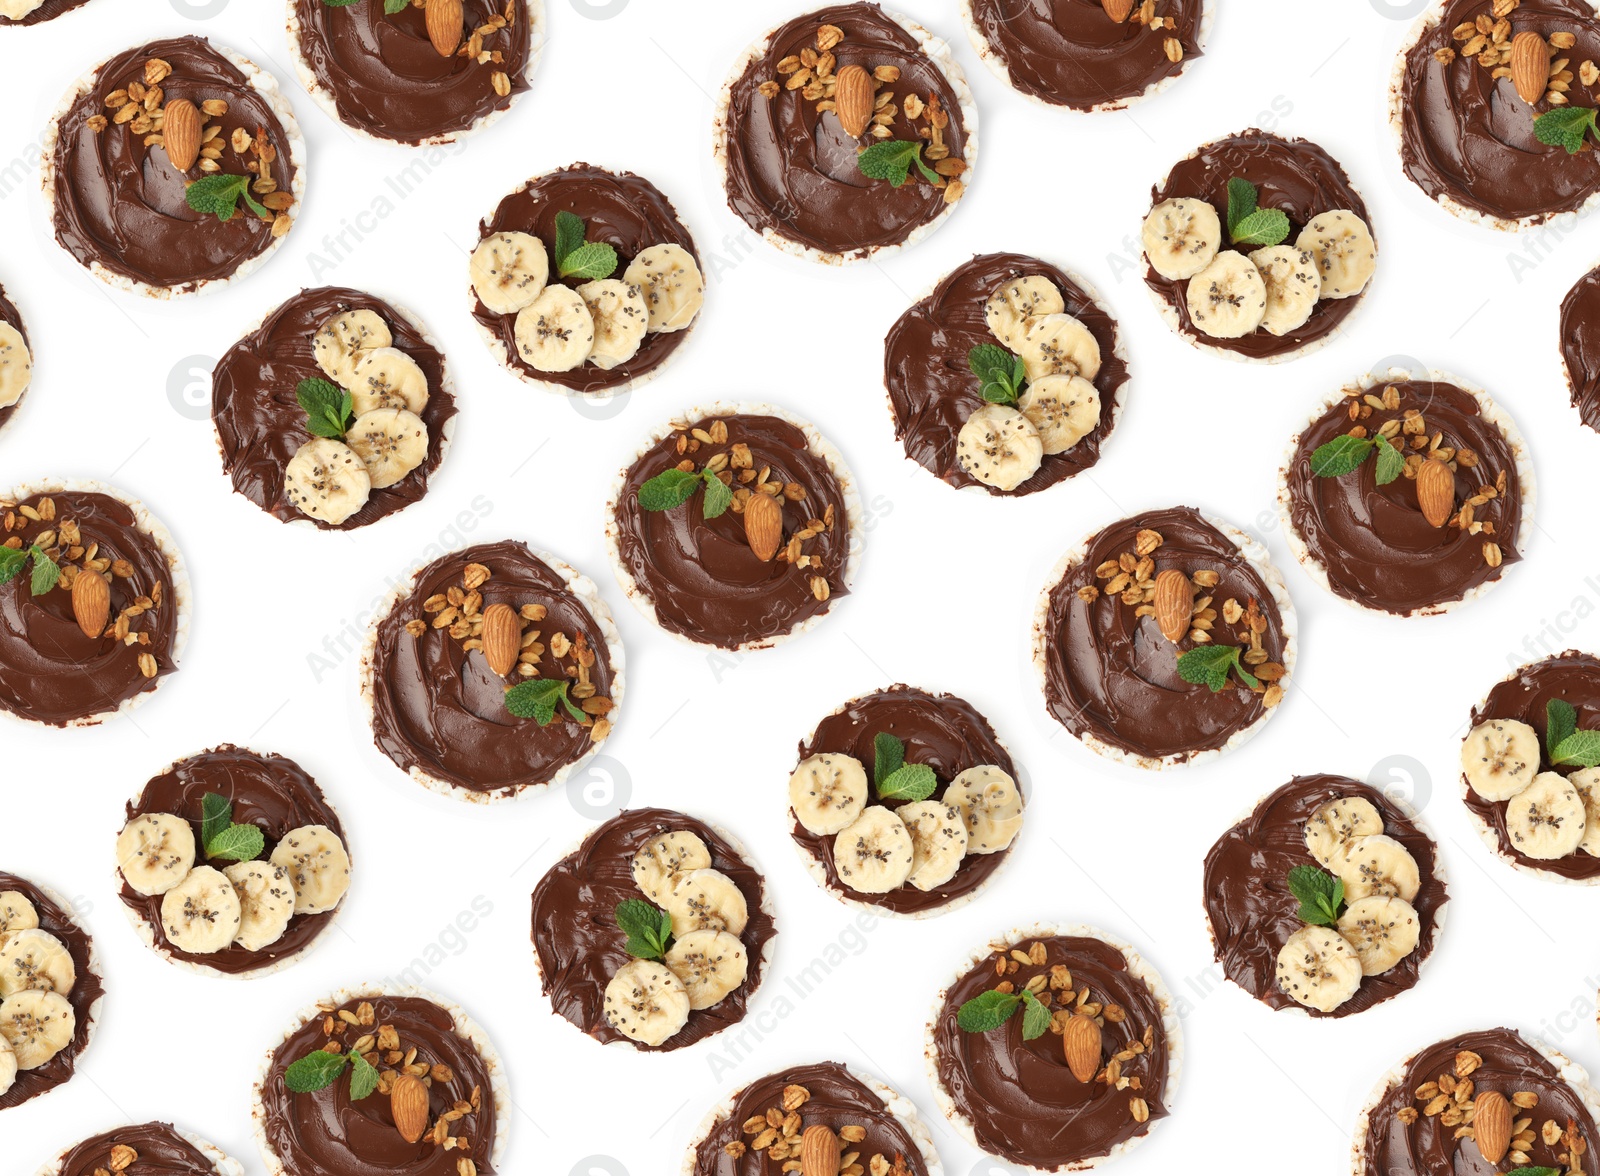 Image of Set of puffed corn cakes with chocolate spread on white background, top view. Pattern design